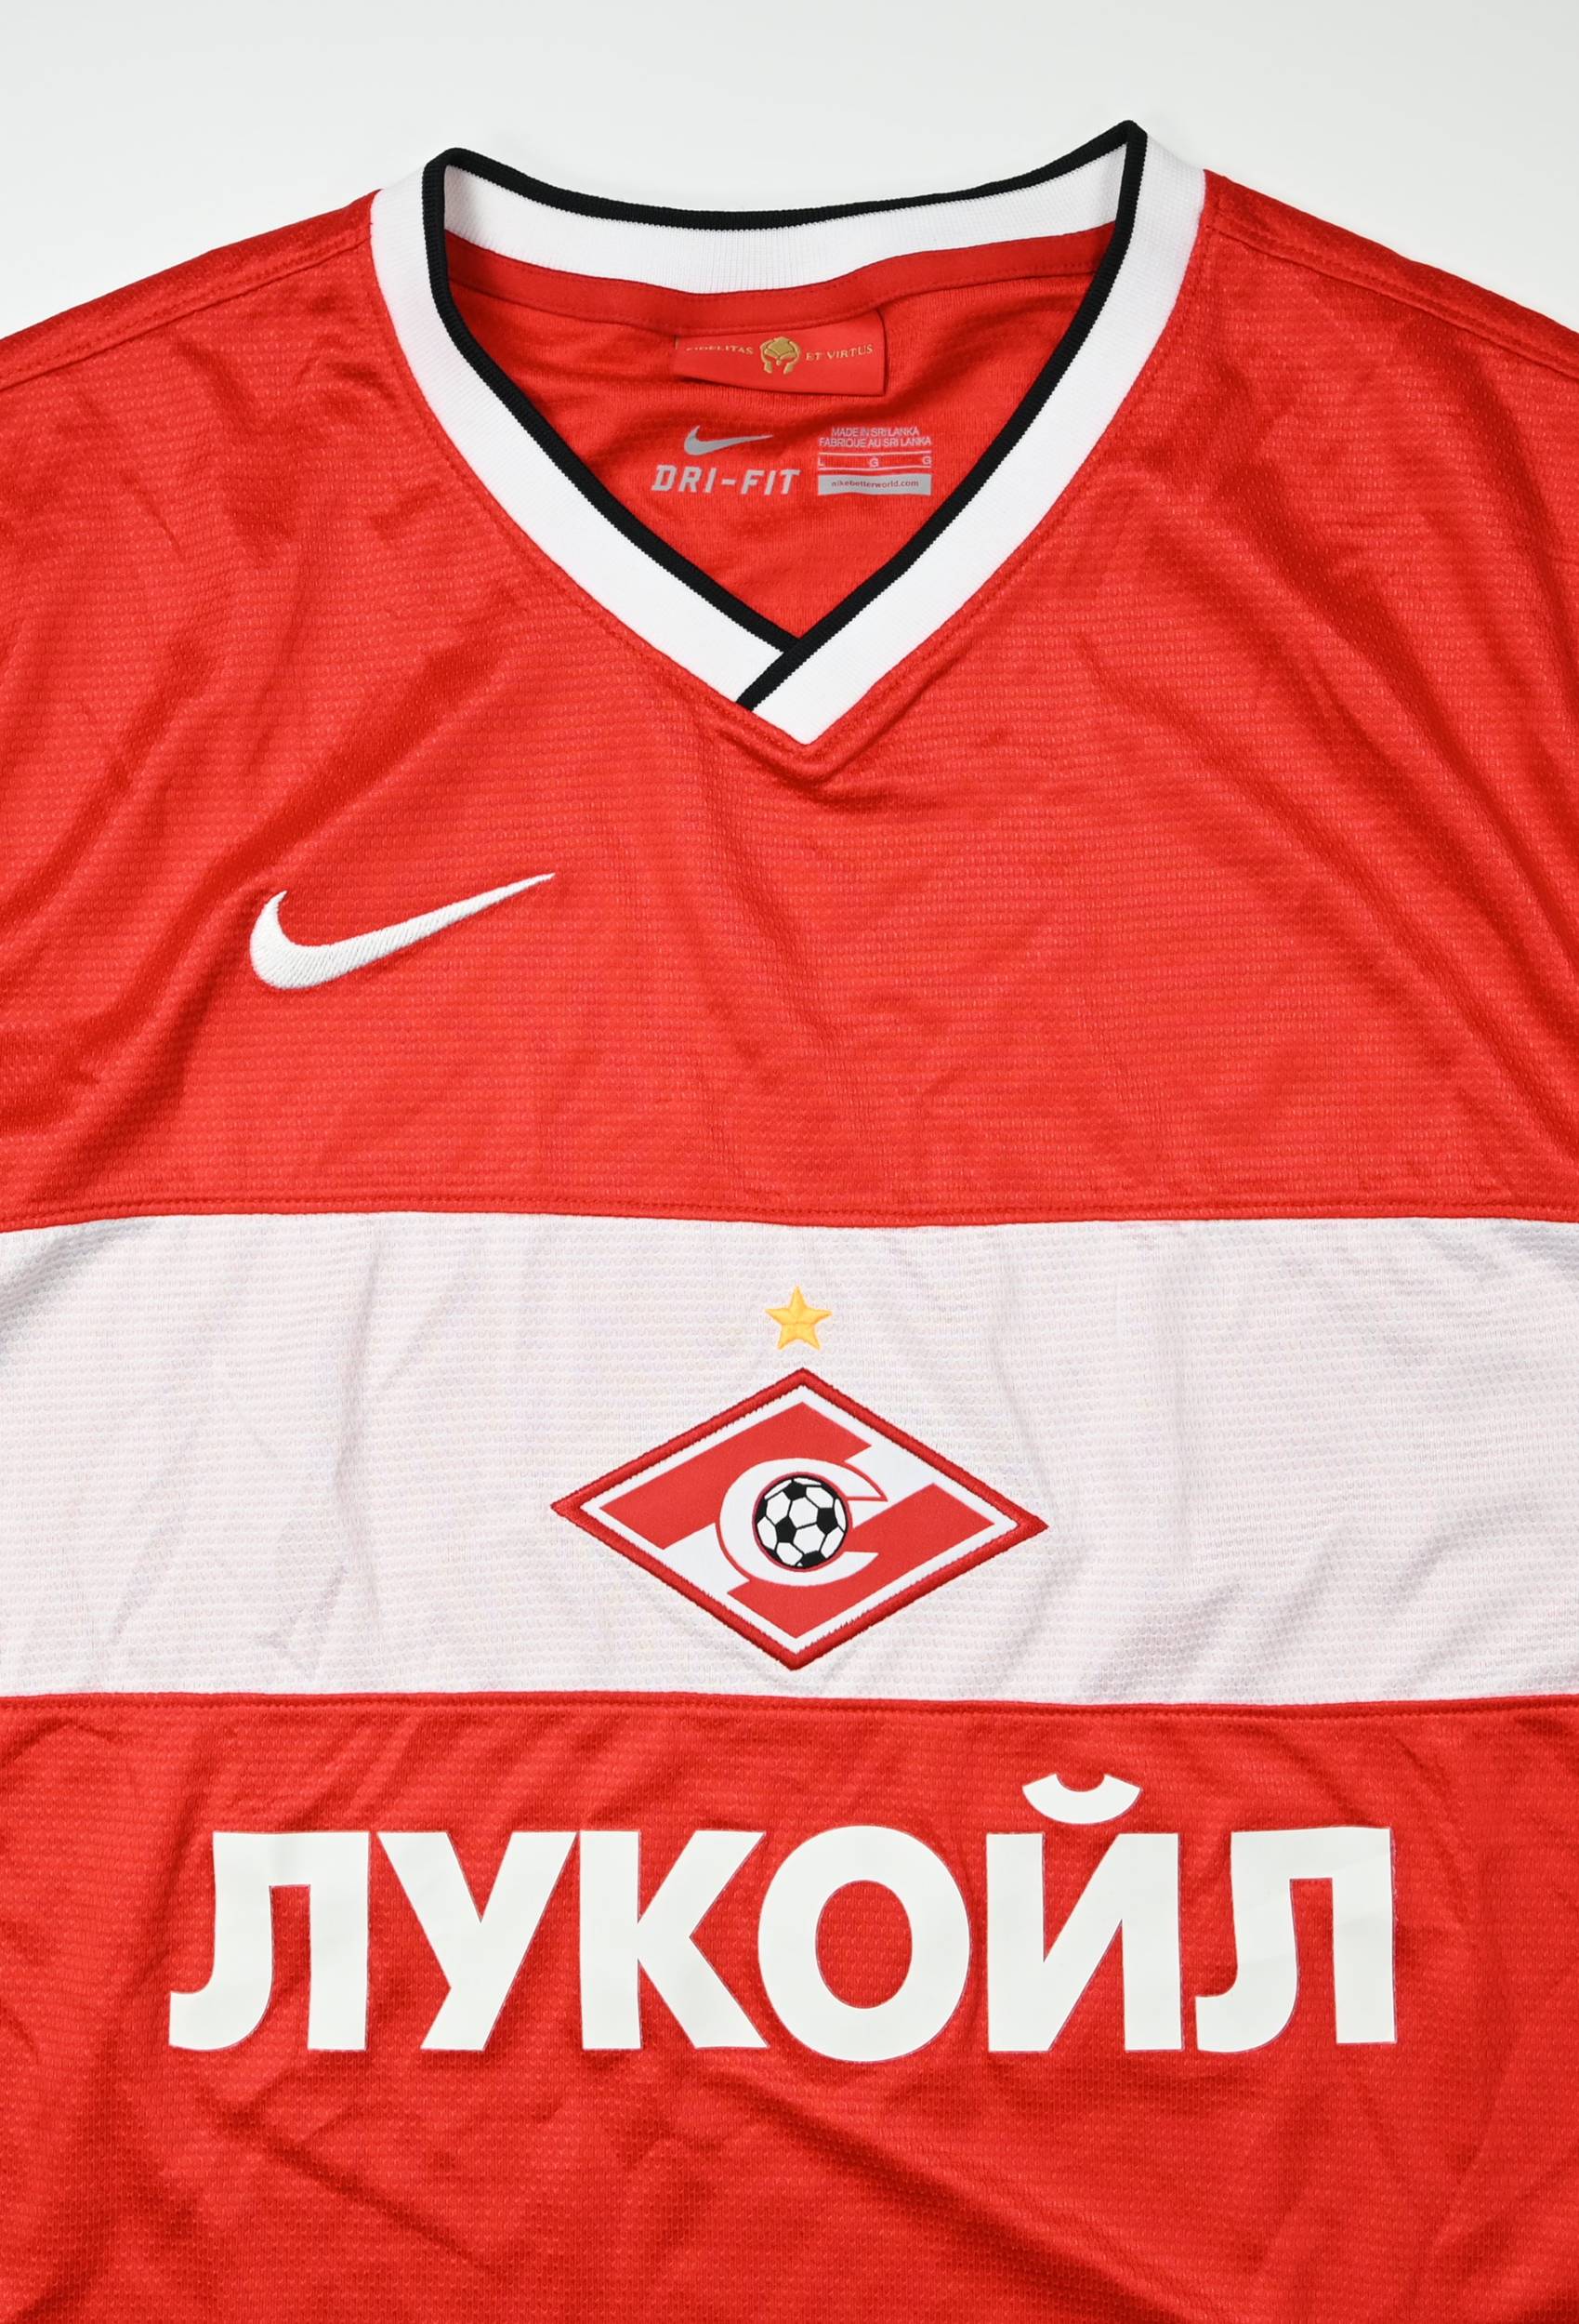 Spartak Moscow 13-14 (2013-14) Home and Away Kits Released - Footy Headlines